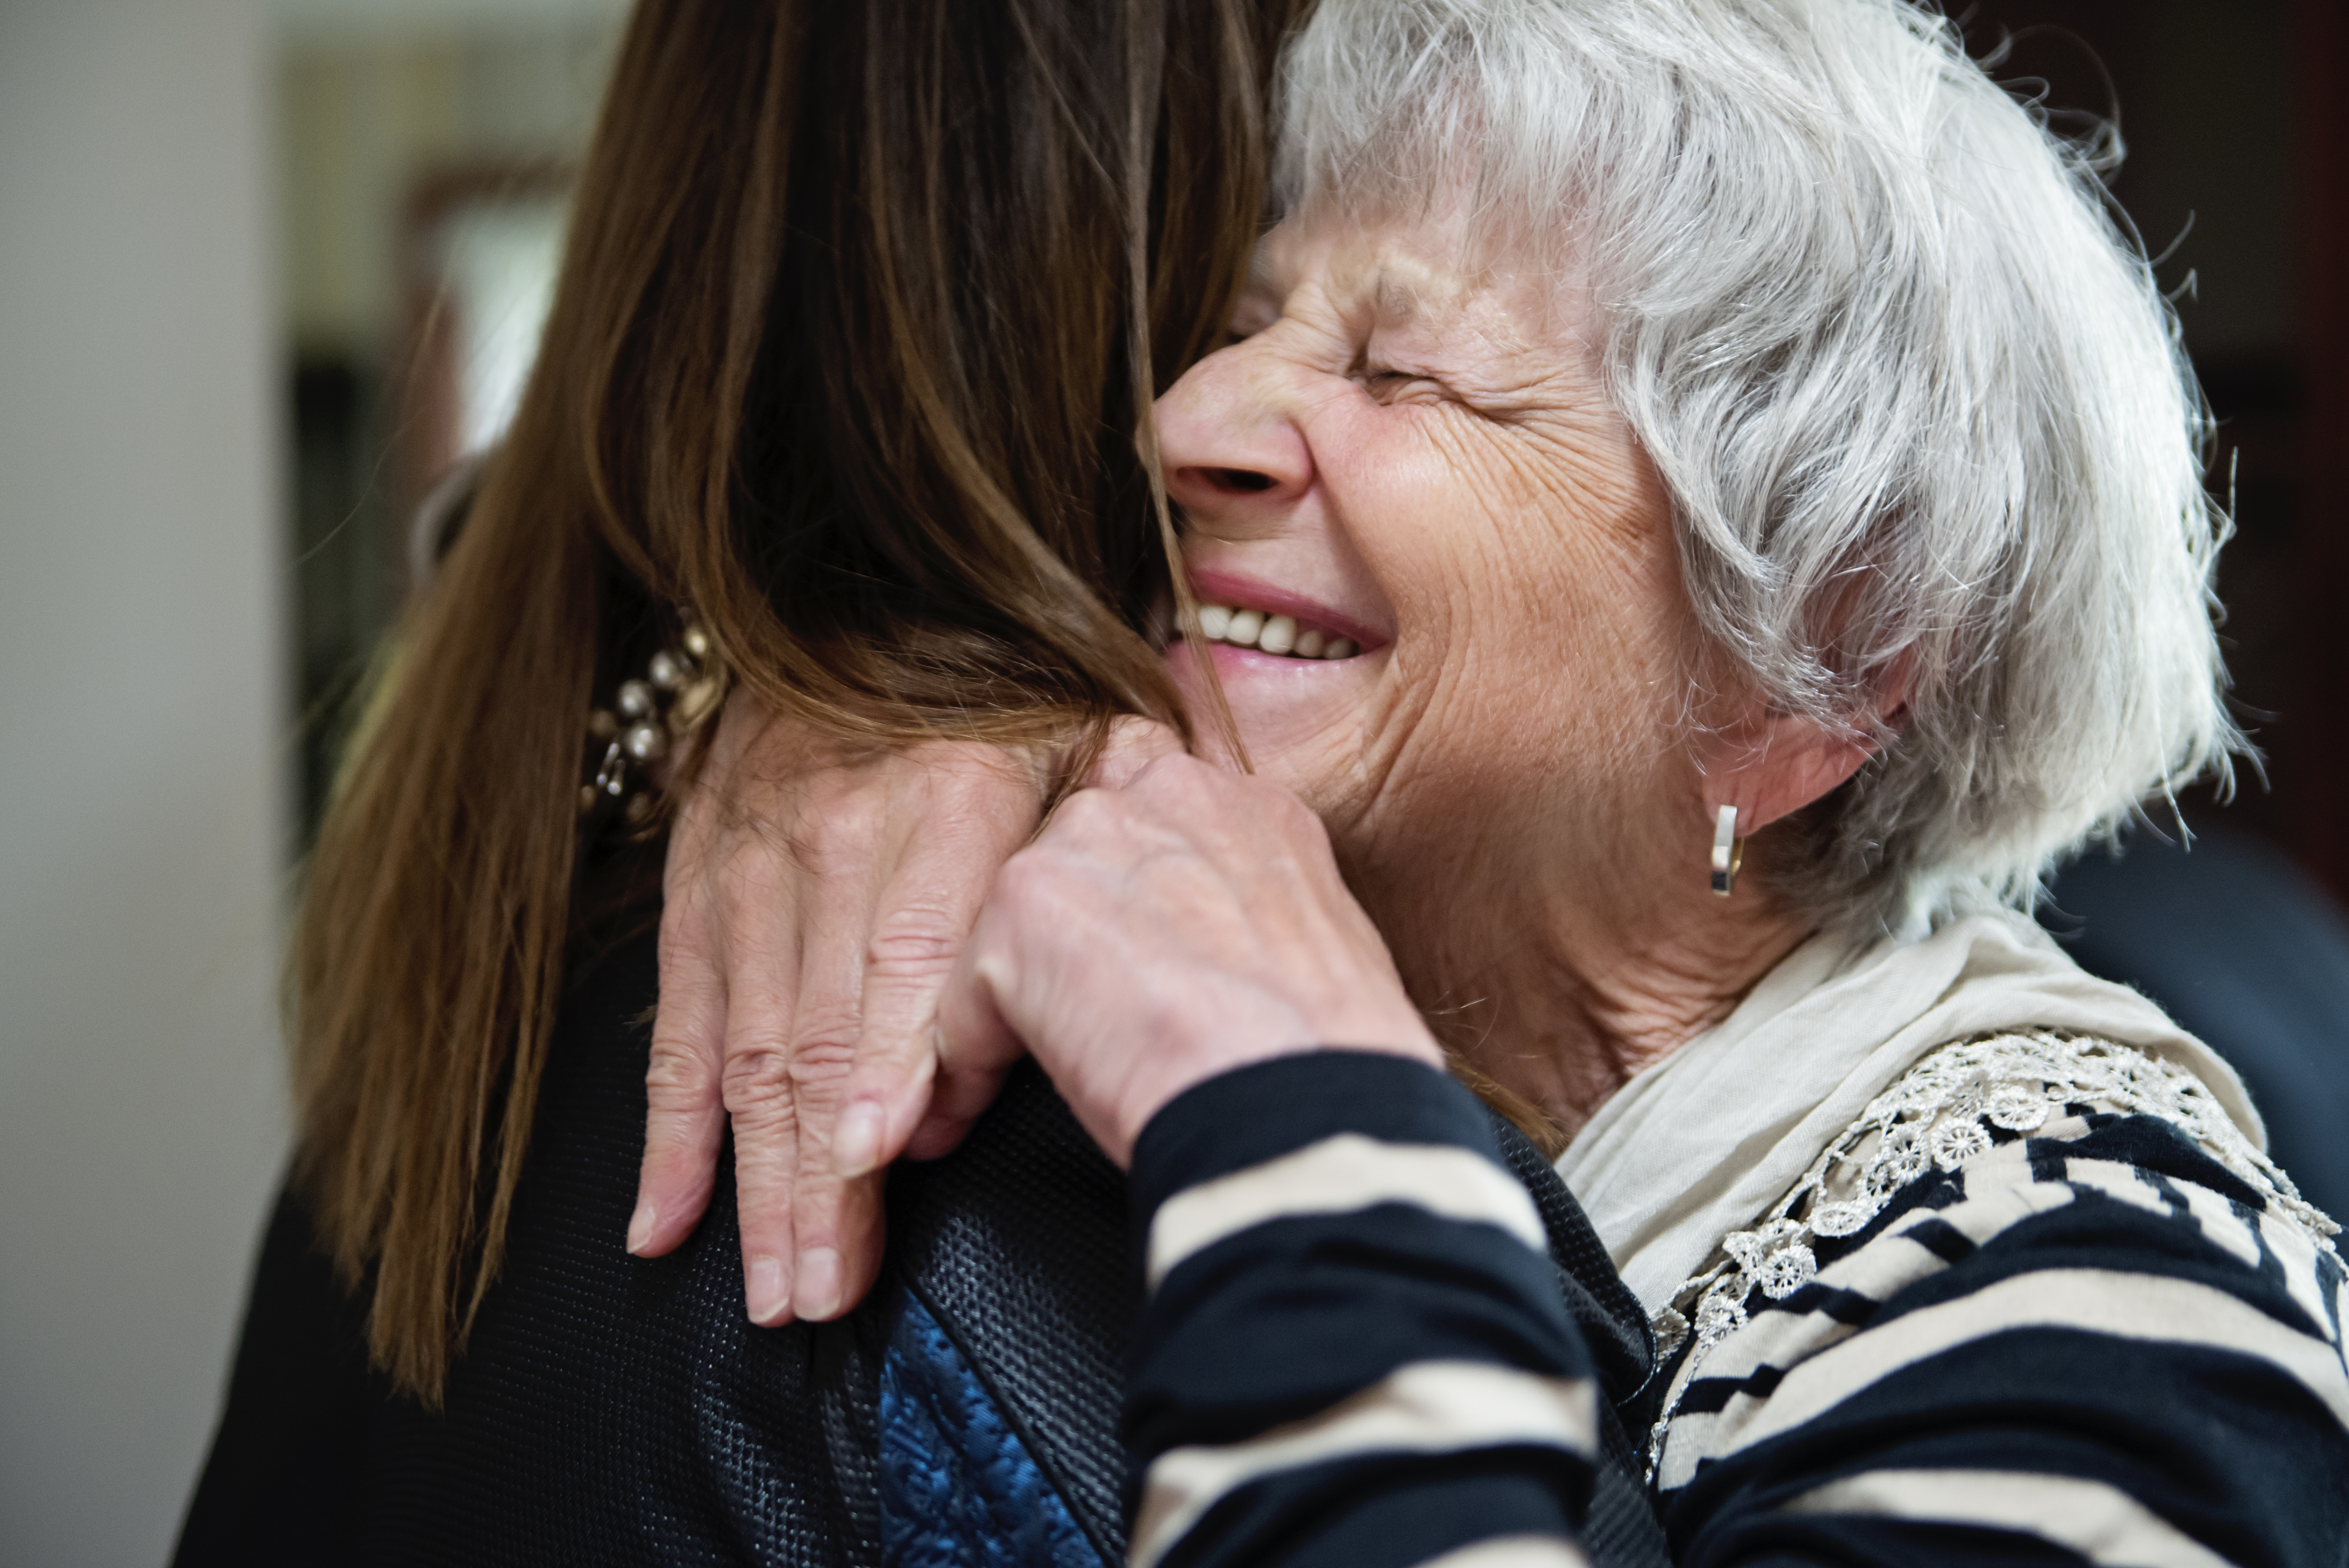 Senior grand-mother and adult grand-daughter hugging | Source: Getty Images